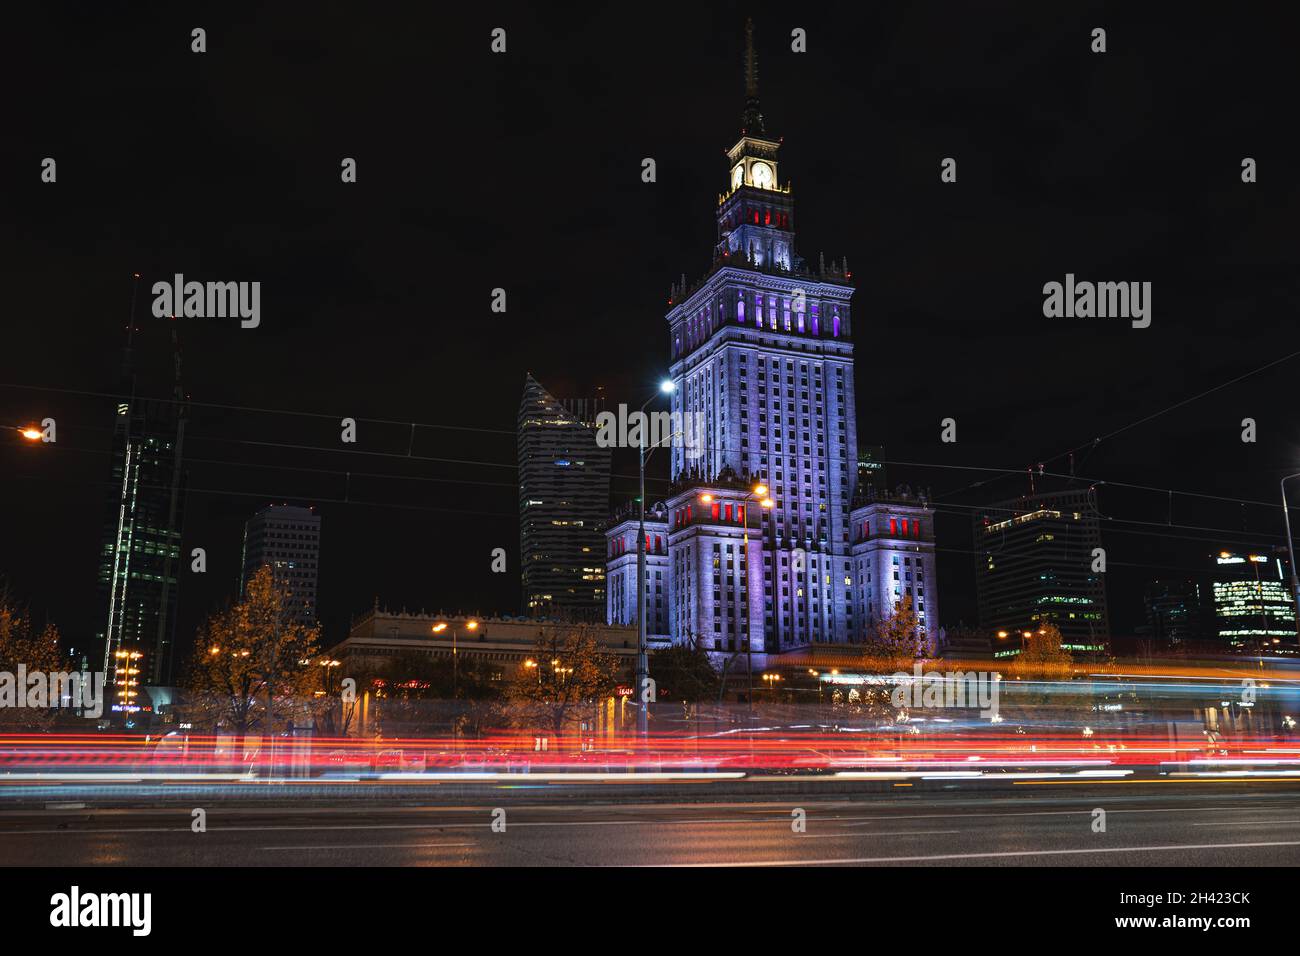 Palace of Culture and Science illuminated by night in Warsaw city center. Traffic light and cars in motion on long exposure. Warsaw, Poland - October 23, 2021 Stock Photo